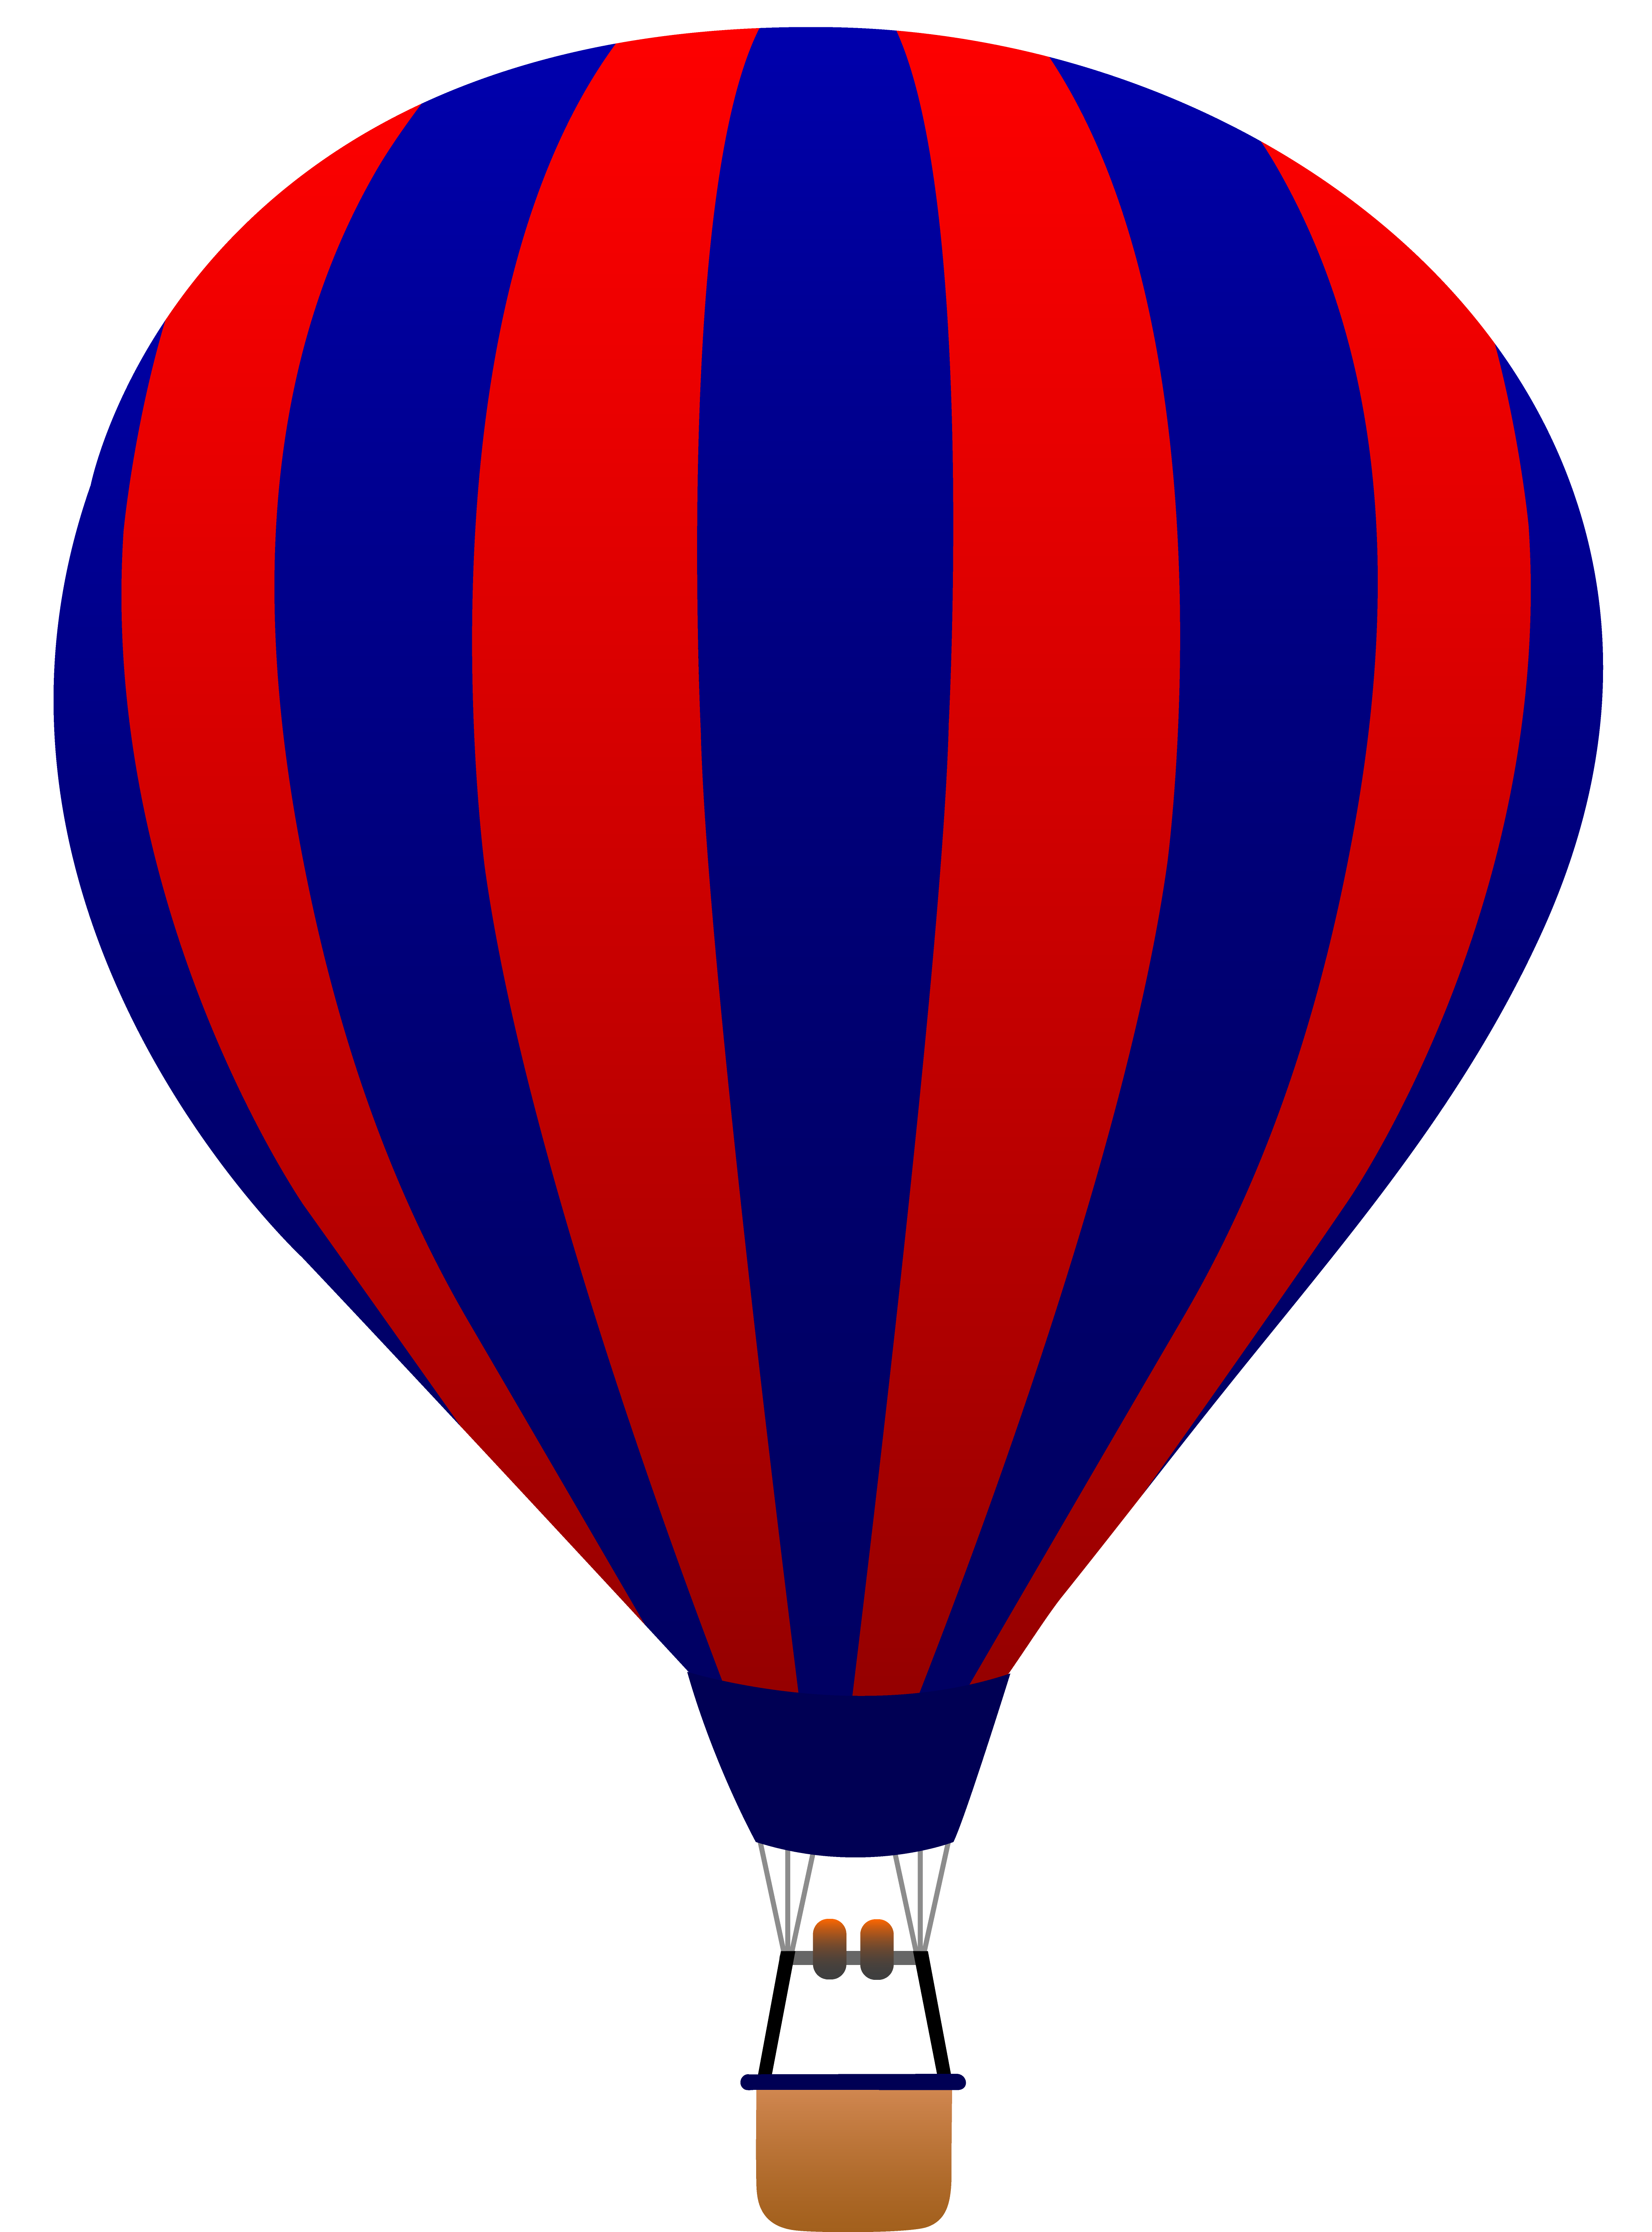 Red and Blue Striped Hot Air Balloon - Free Clip Art